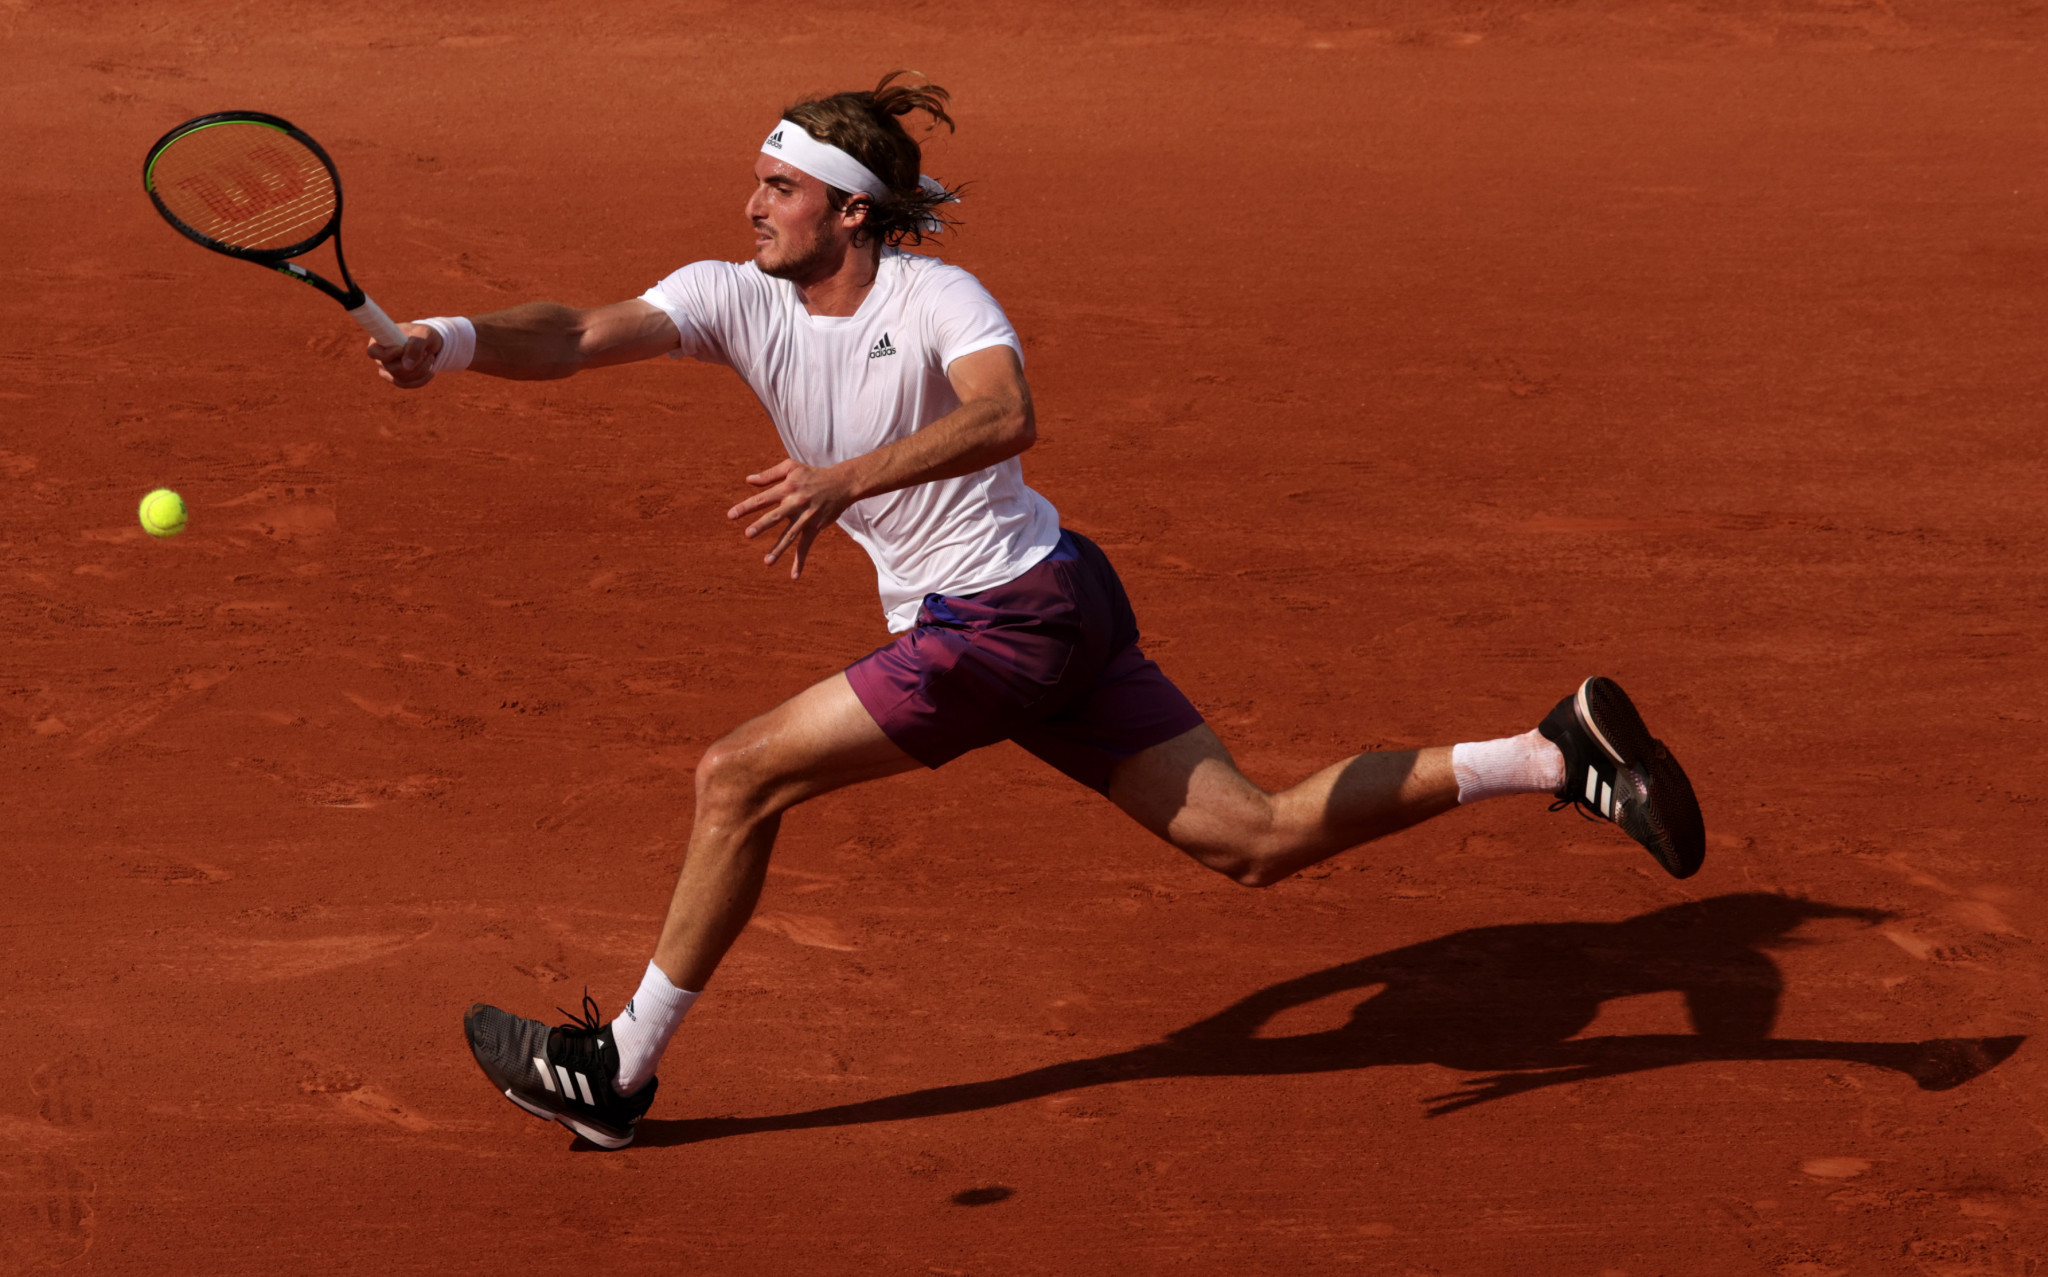 Stefanos Tsitsipas had little problems dispatching Pedro Martinez in straight sets ©Getty Images